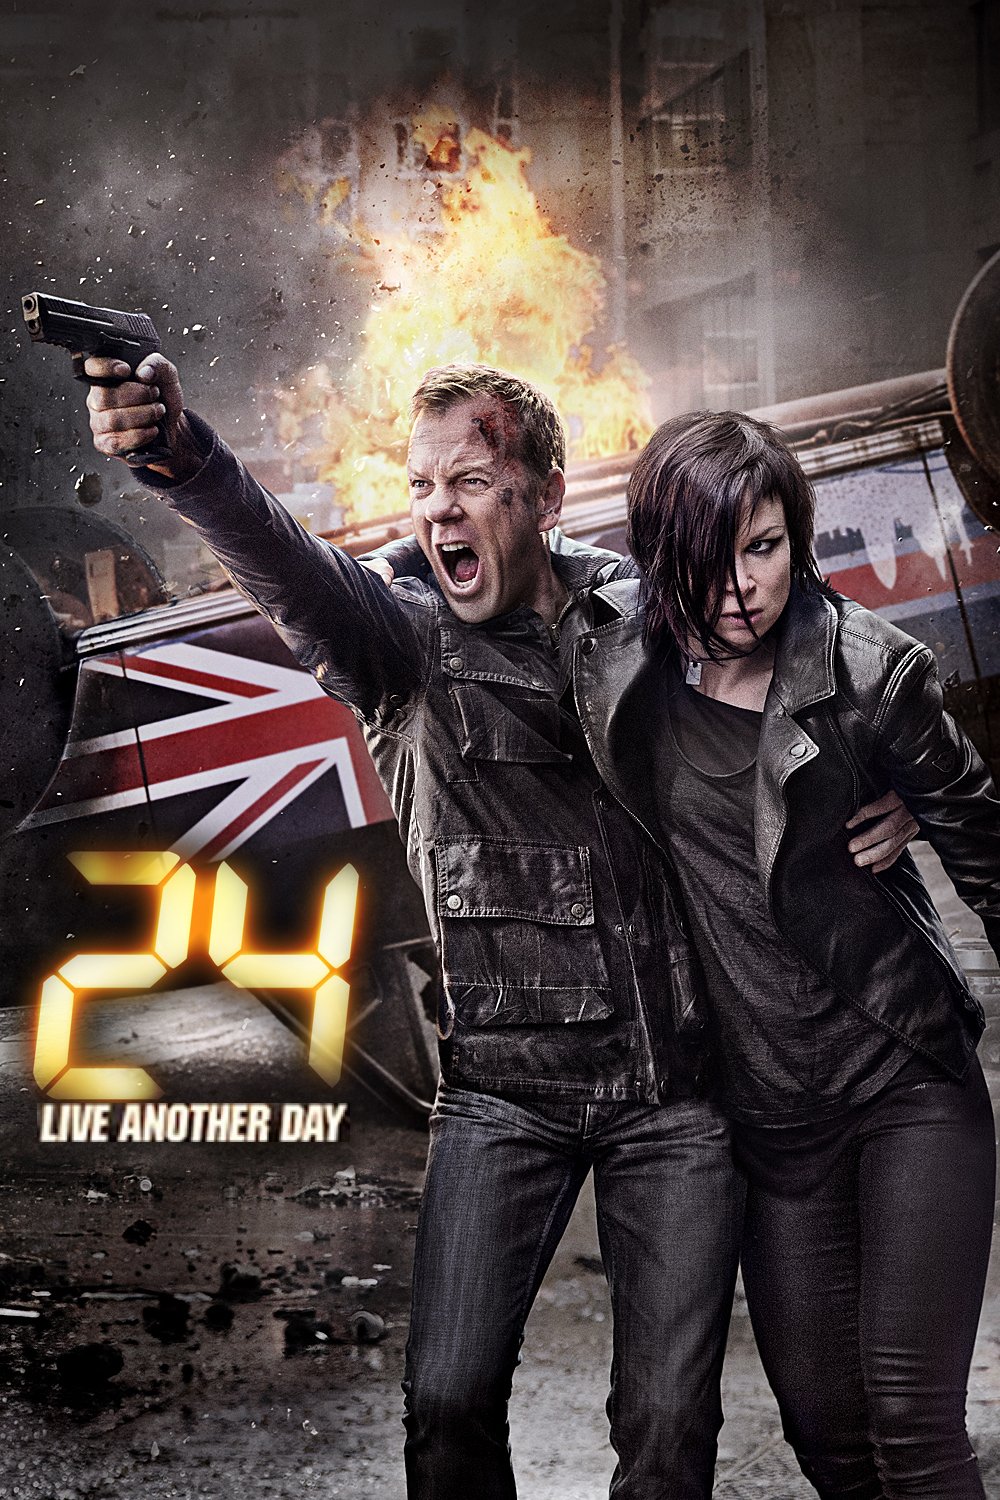 24 heures chrono : Live Another Day